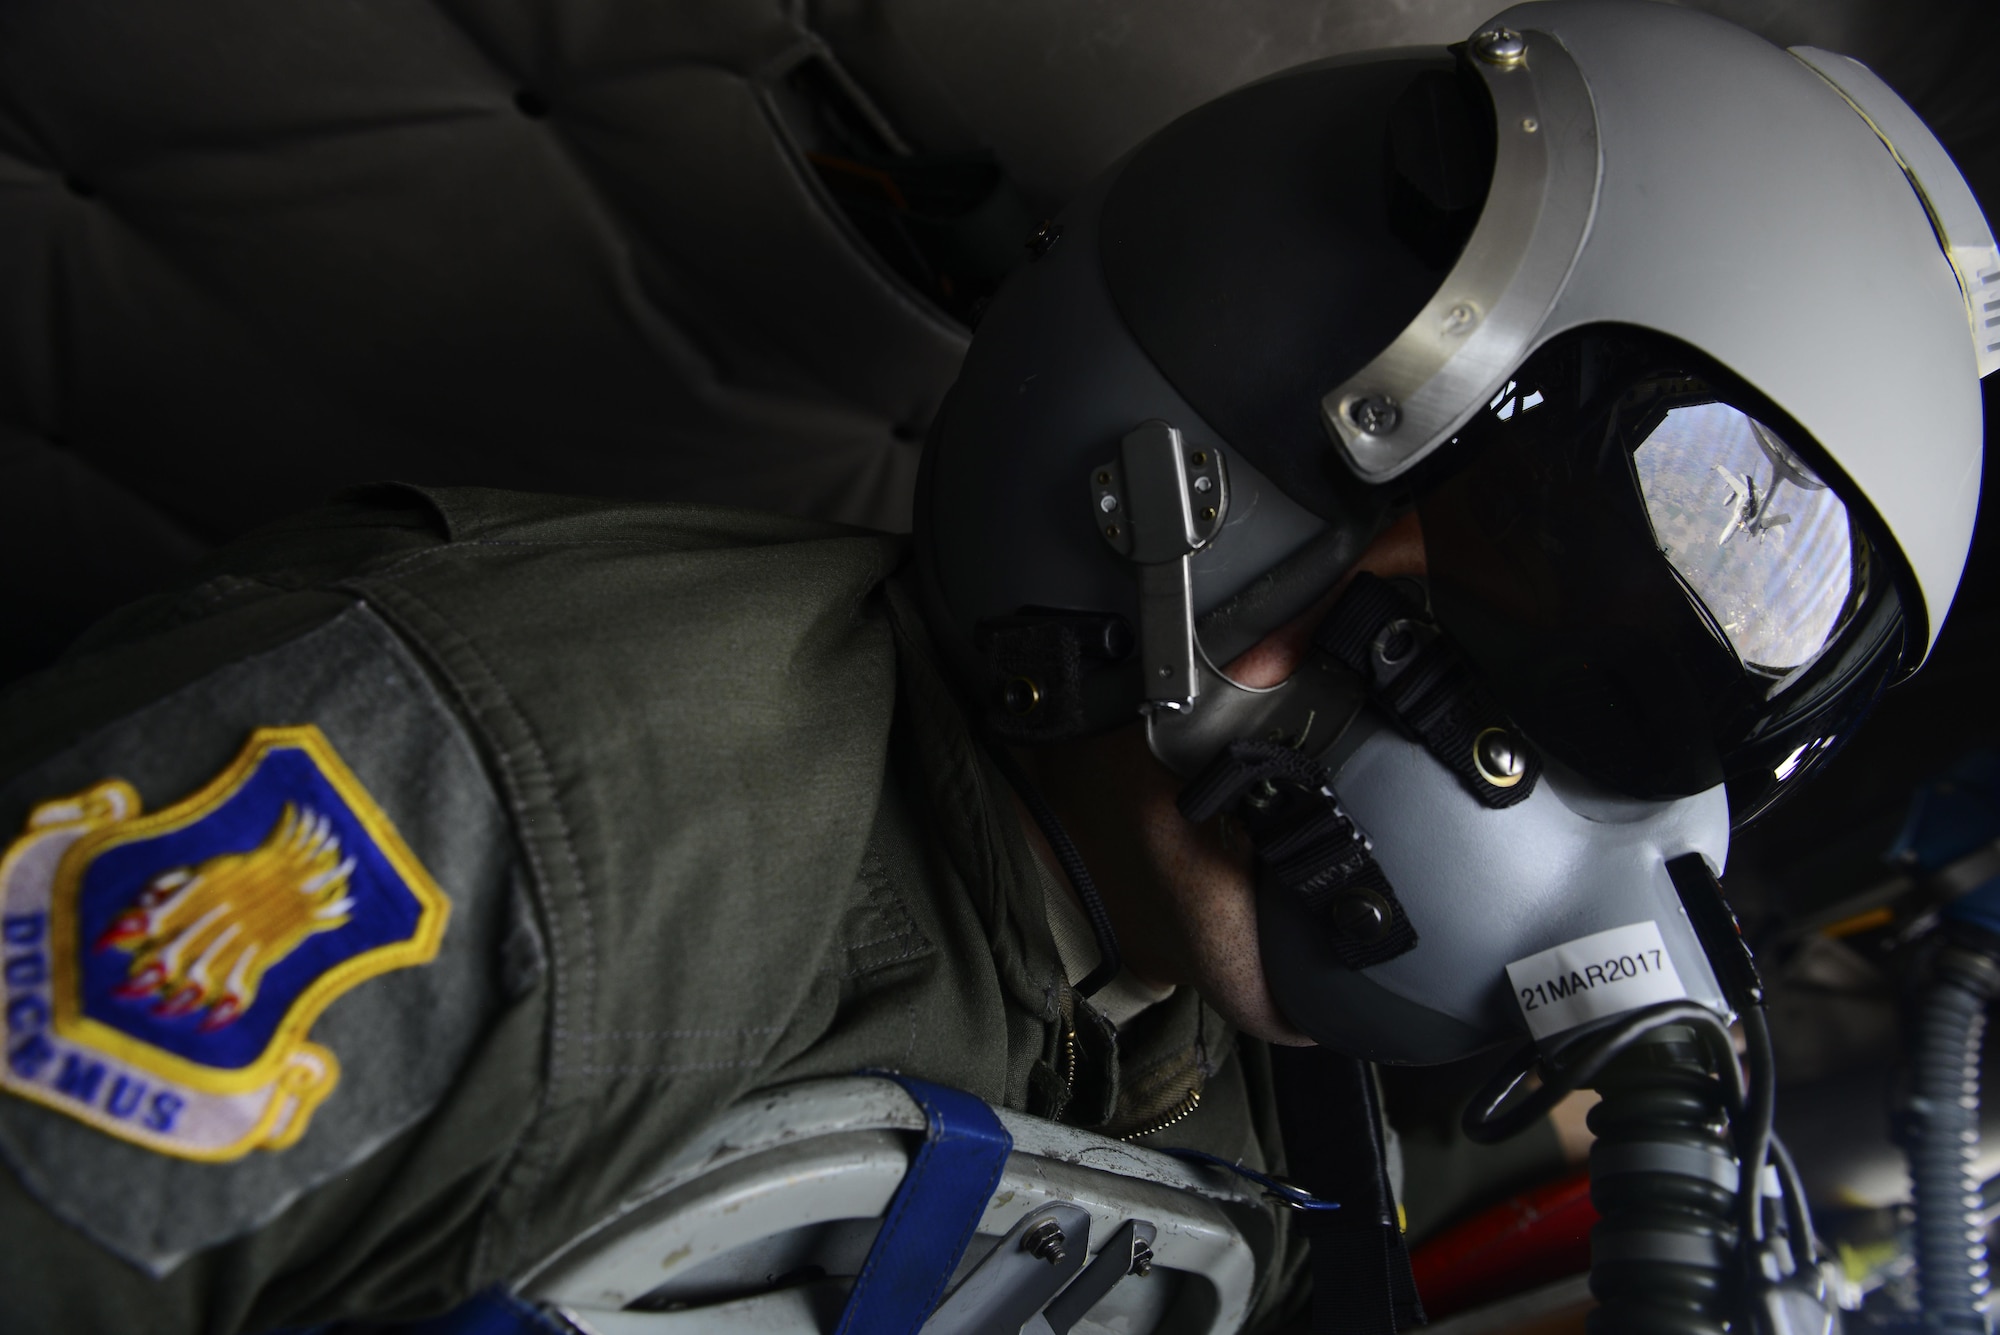 Master Sgt. Bartek Bachleda, 22nd Air Refueling Wing Plans and Programs superintendent, refuels an F-18 Hornet in the air over Missouri, Feb. 10, 2017. Bachleda developed an ergonomically correct support cushion and floor panel for KC-135 Stratotanker boom operators, which potentially saves Airmen from future medical problems. (U.S. Air Force photo/Staff Sgt. Trevor Rhynes)